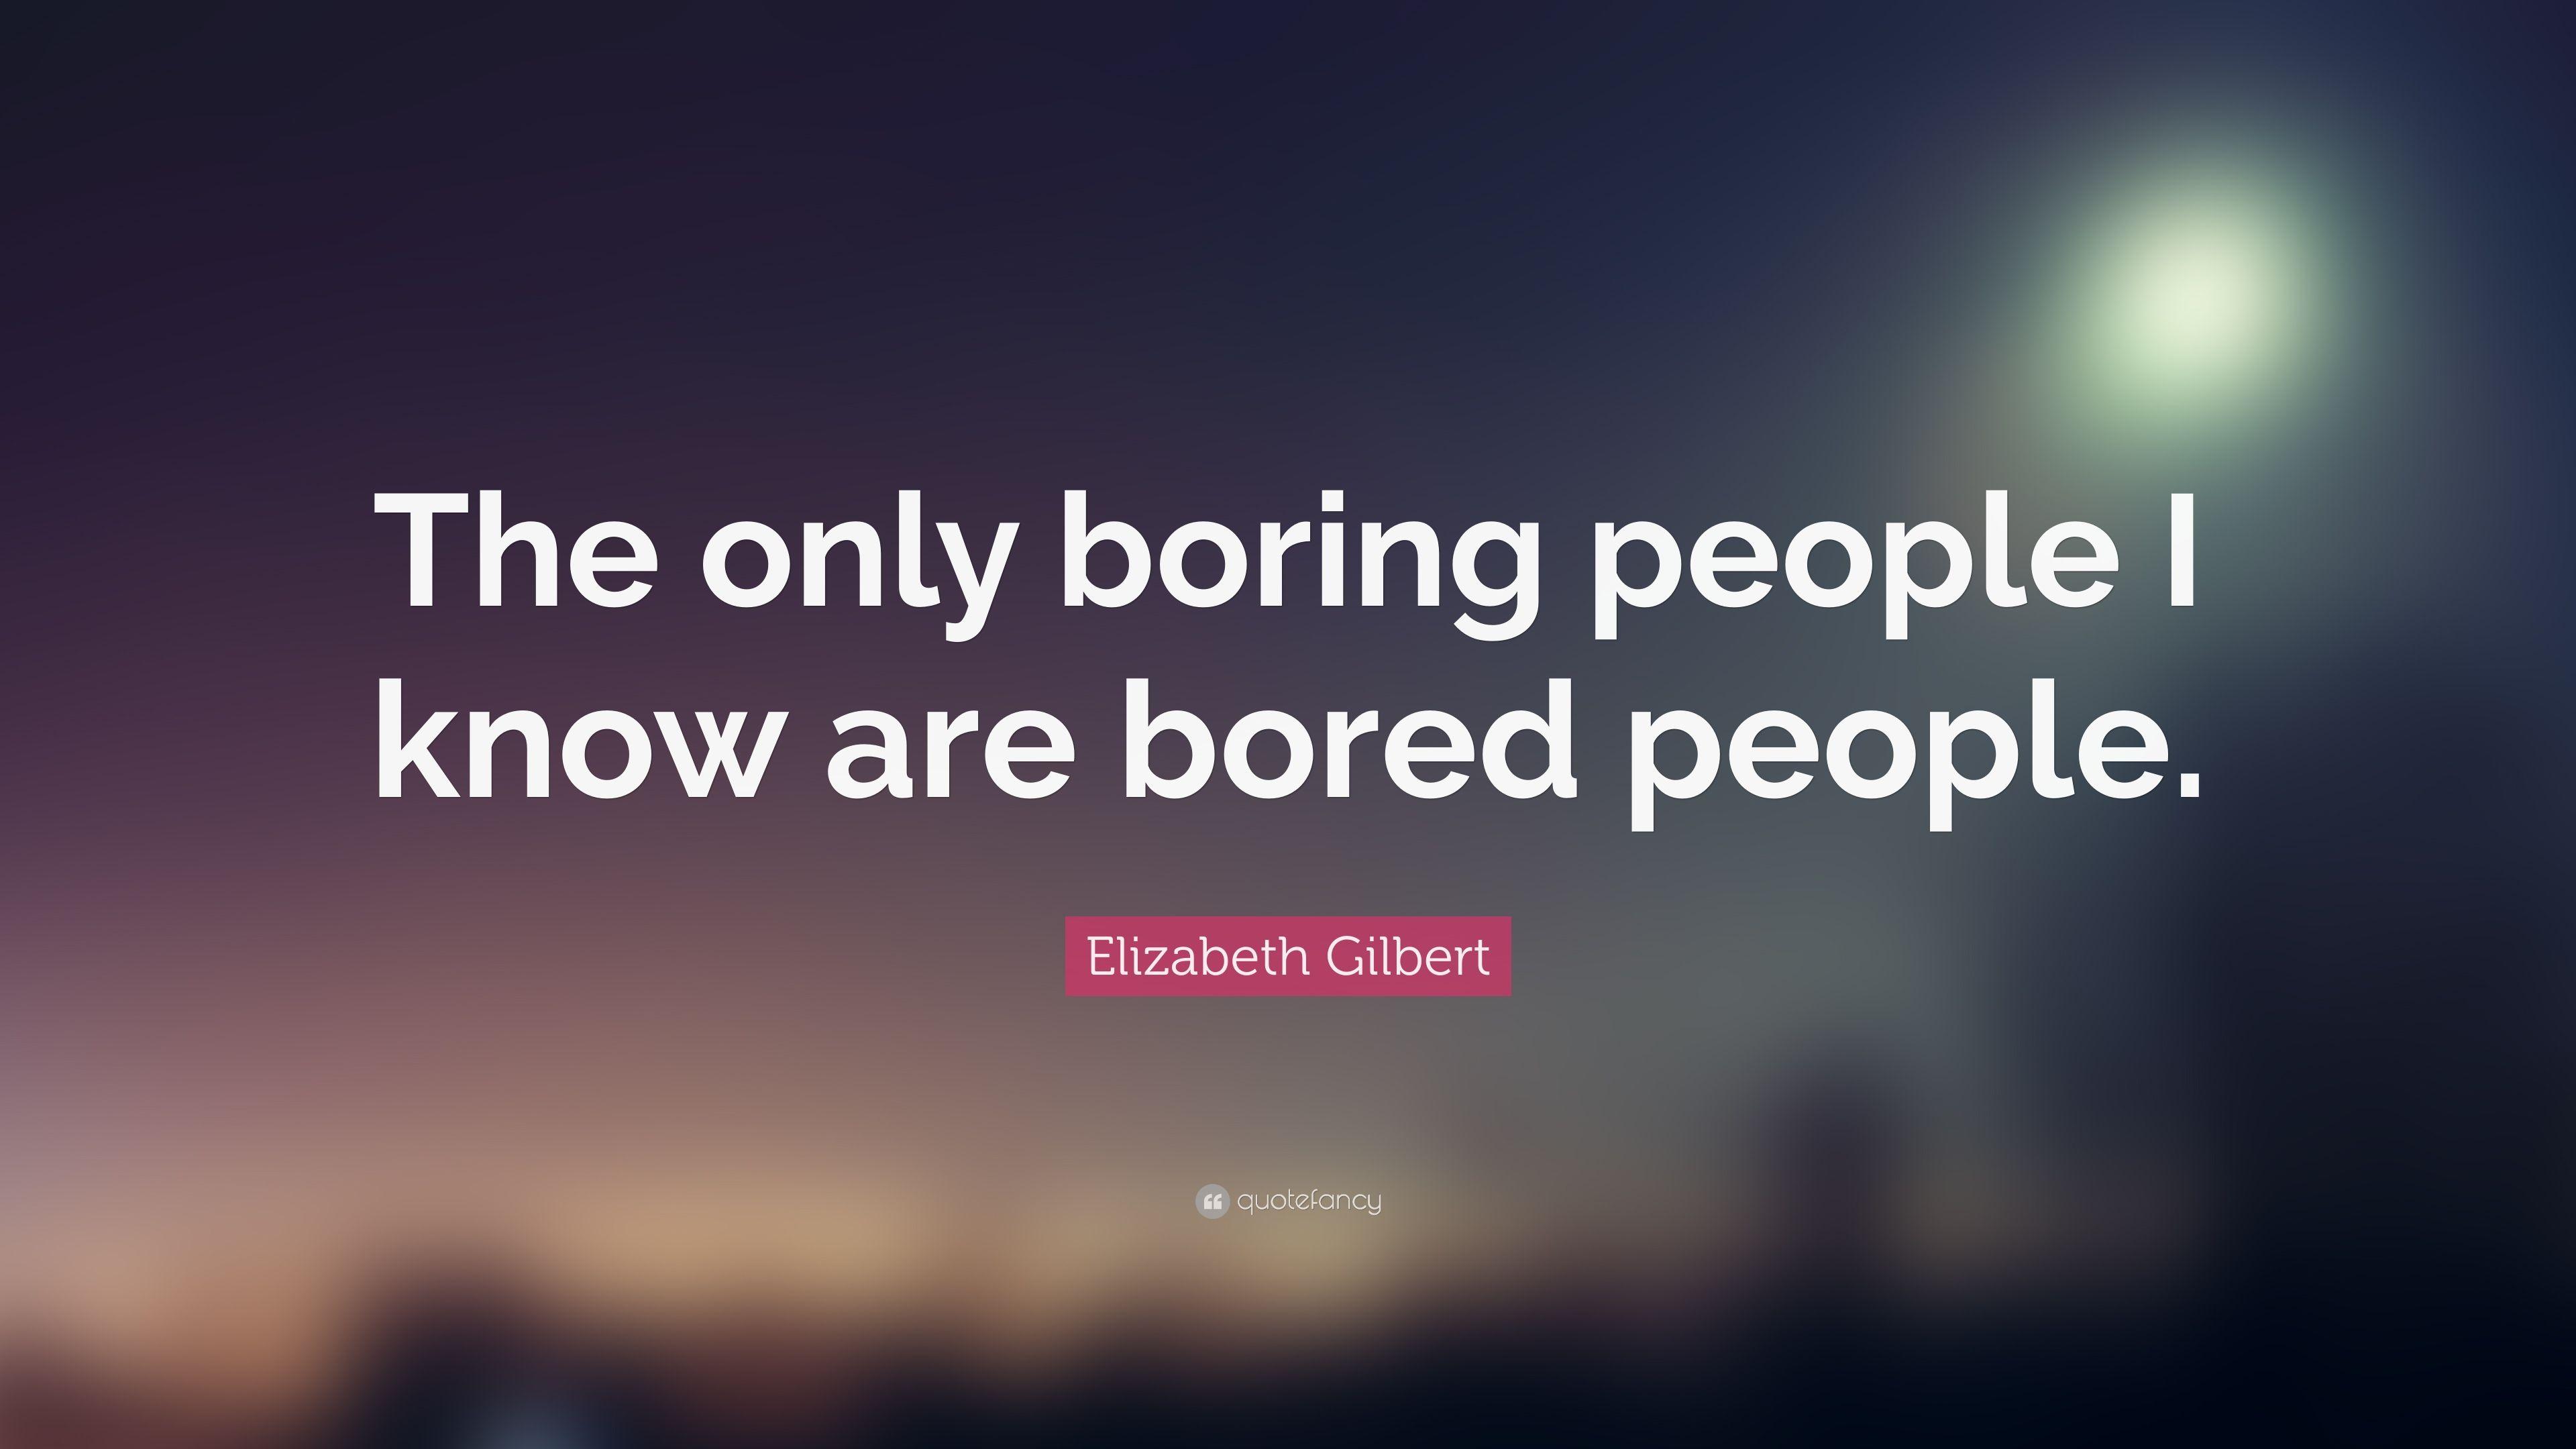 Elizabeth Gilbert Quote: “The only boring people I know are bored